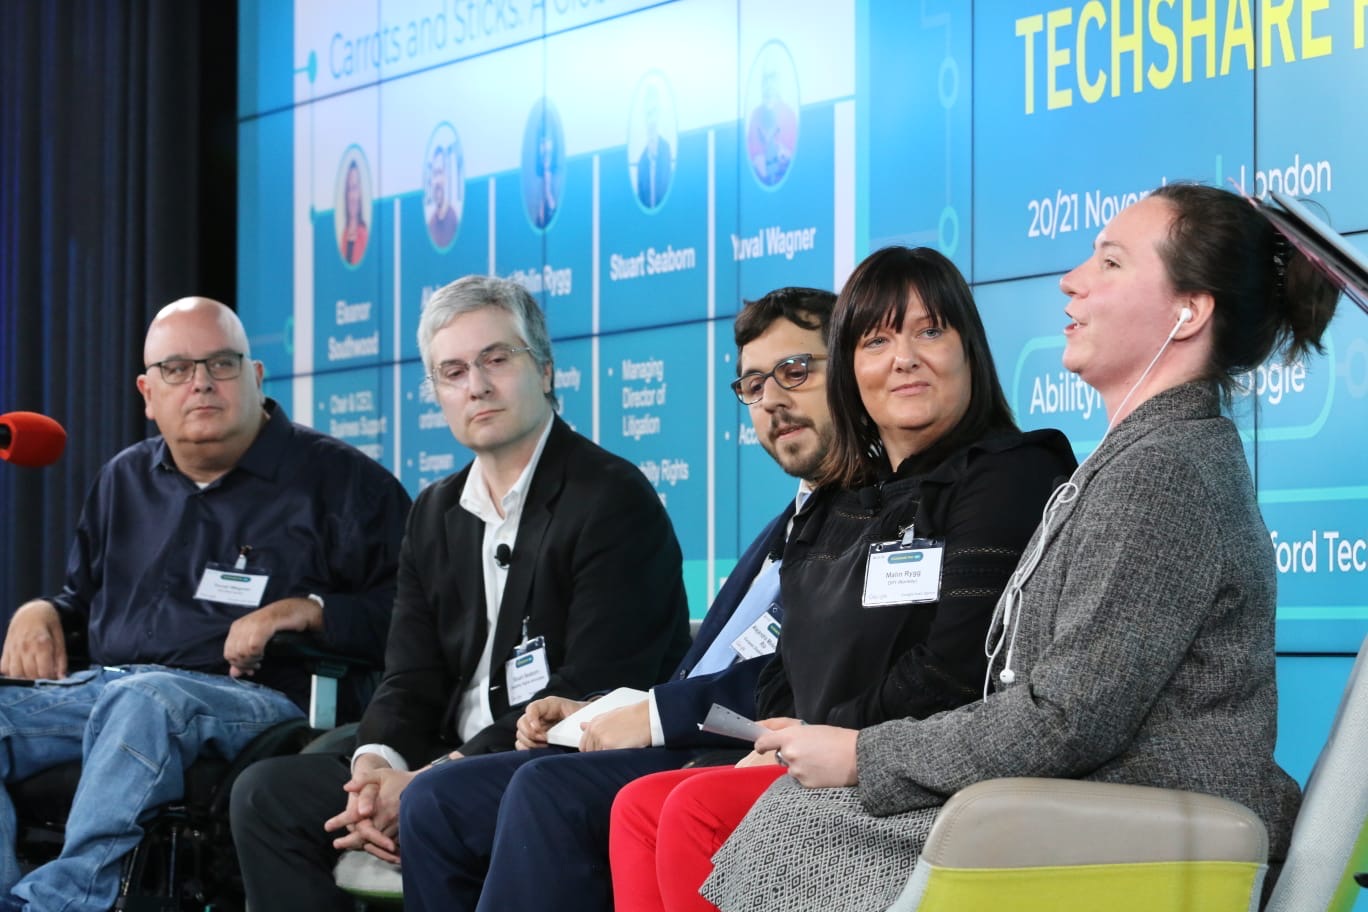 Panelists on stage at TechShare Pro, giving a global perspective on accessibility